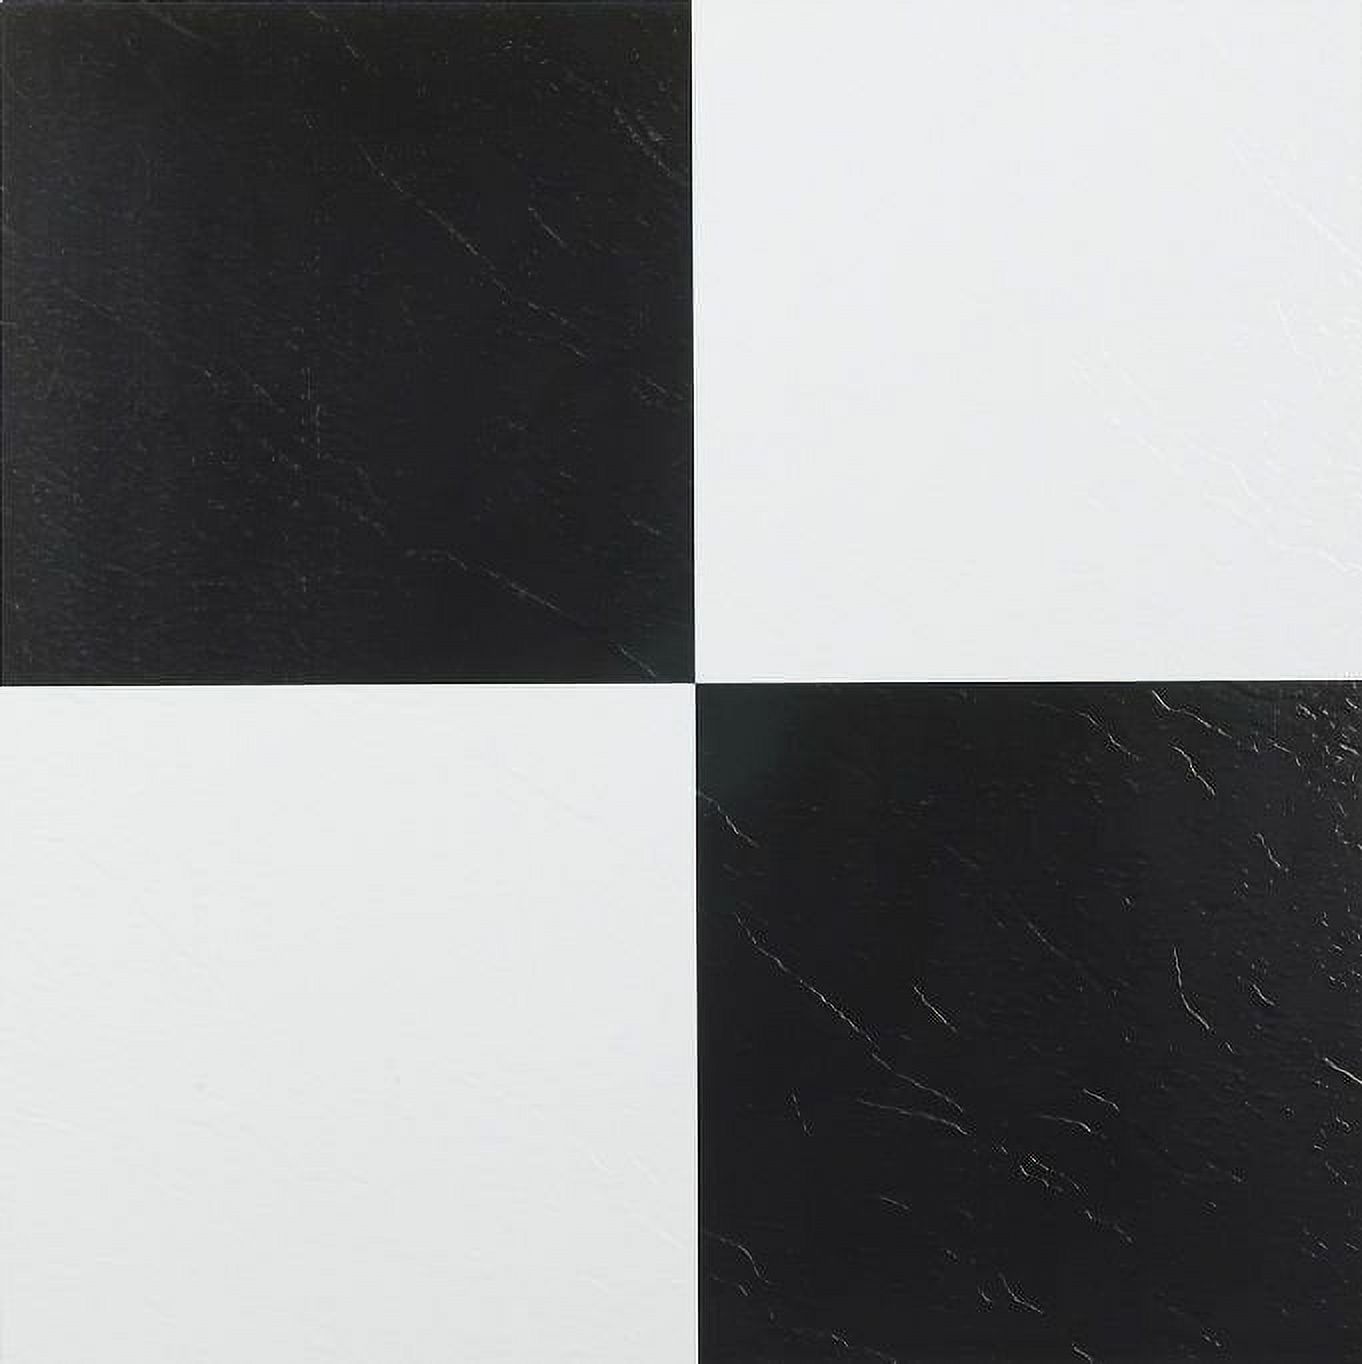 Black & White Checkered Vinyl Floor Tiles Adhesive Stick and Peel 12'' x 12'' 5-Pack (100 Pieces) - image 1 of 2